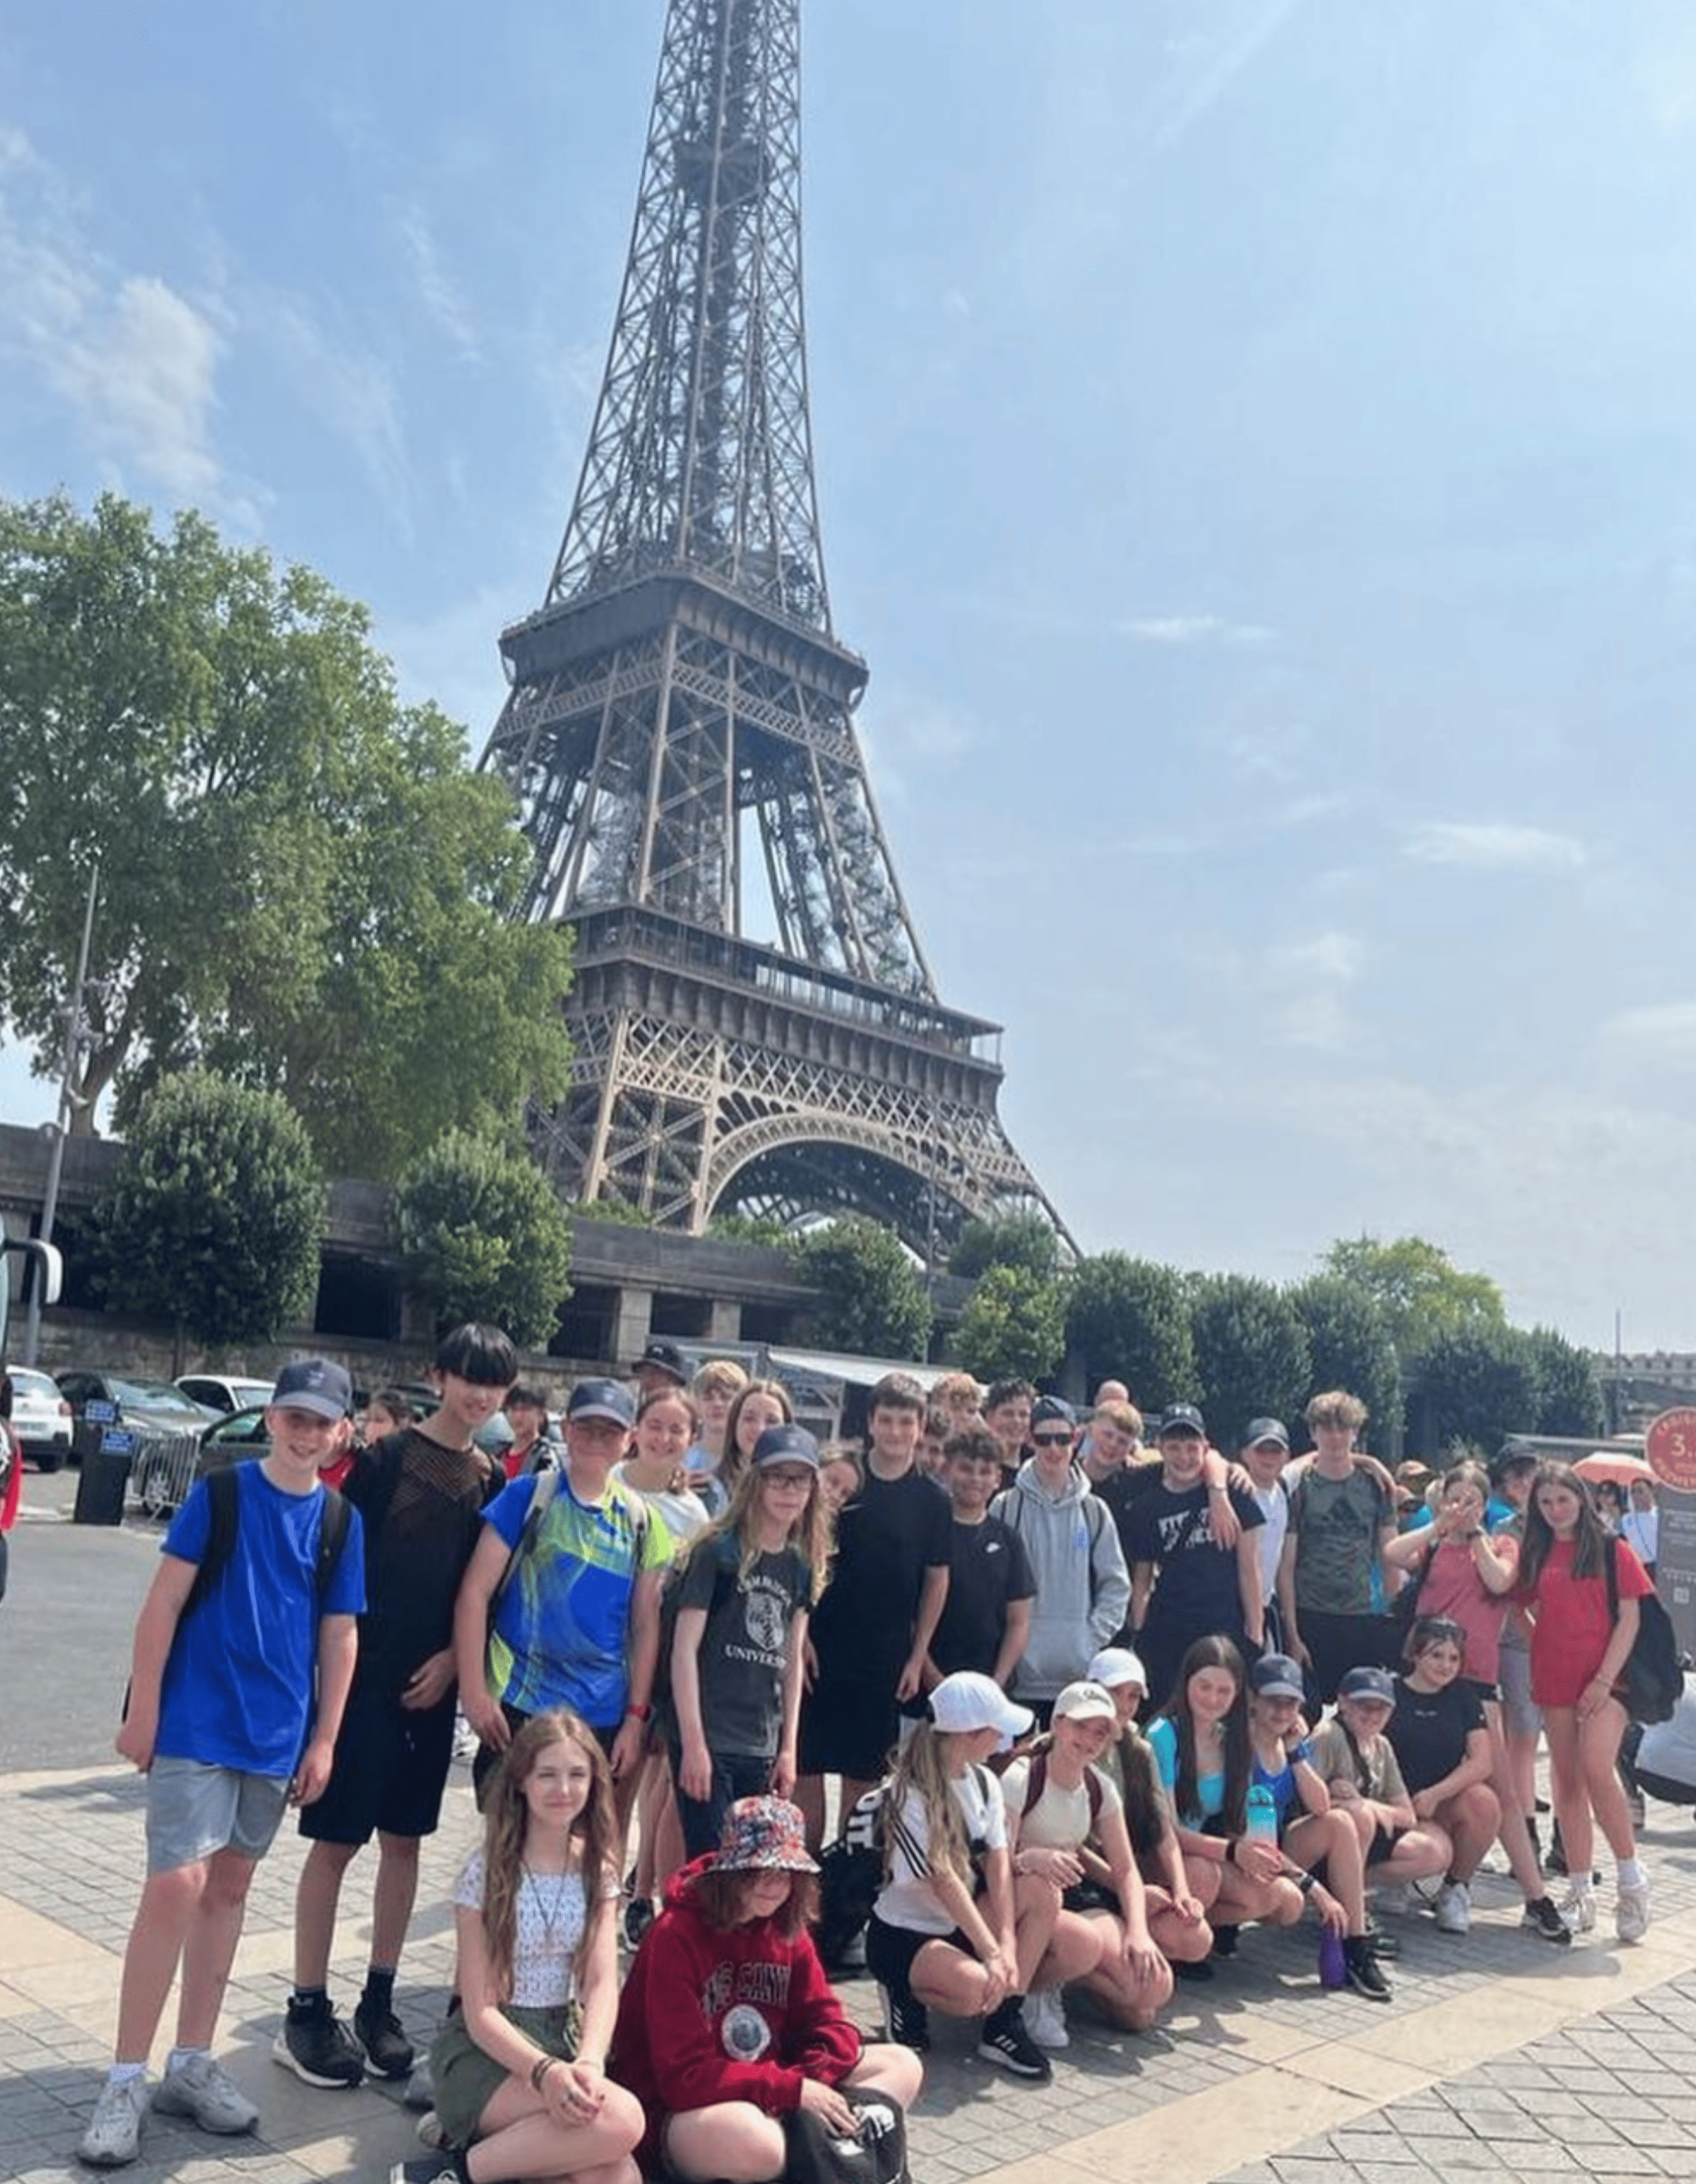 Hazel Grove High School students stand in front of the Eiffel Tower in Paris